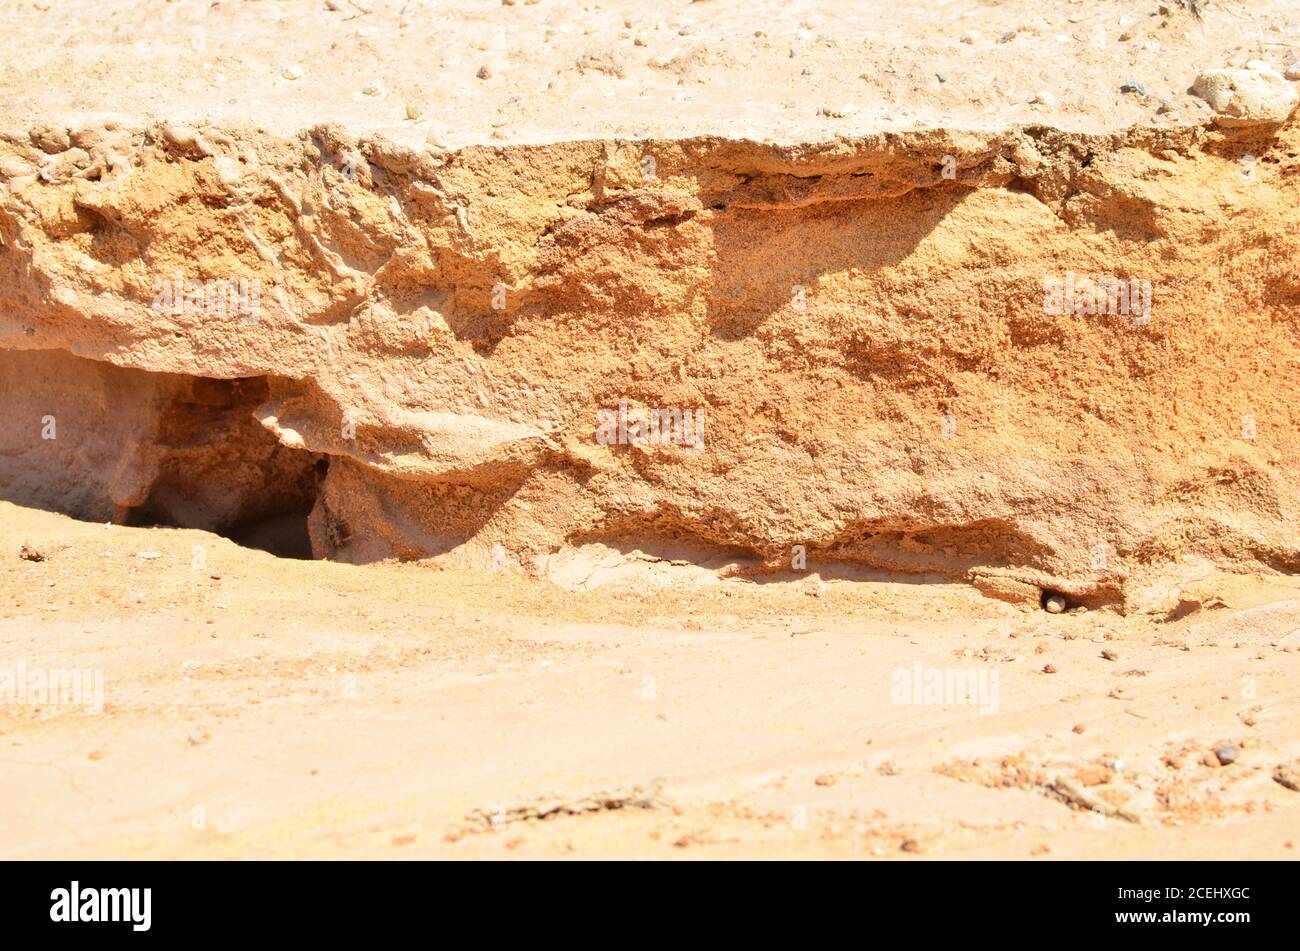 Background of yellow sand with small stones after rain. Soil erosion after heavy rainfall and precipitation. Texture of scattered sand fine gravel Stock Photo